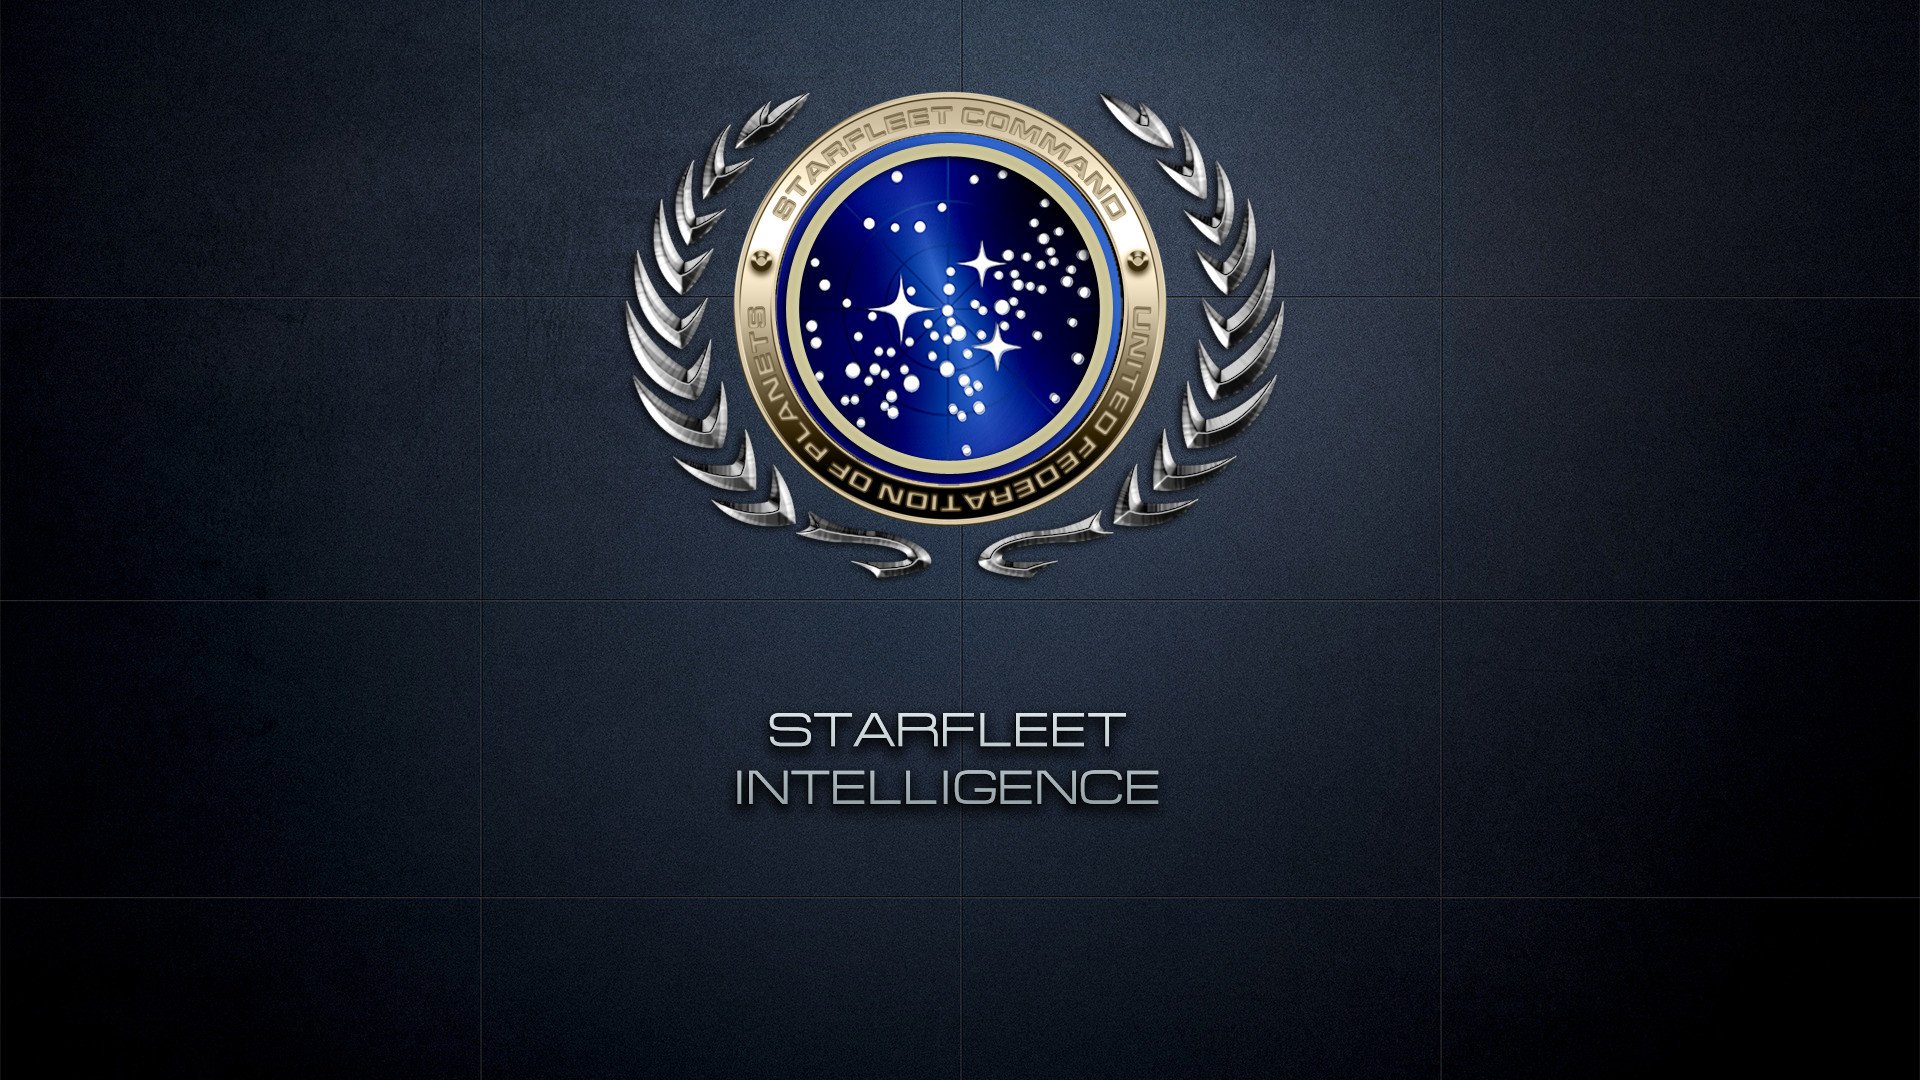 STARFLEET INTELLIGENCE. Insignia of the United Federation of Planets and alternative logo of the